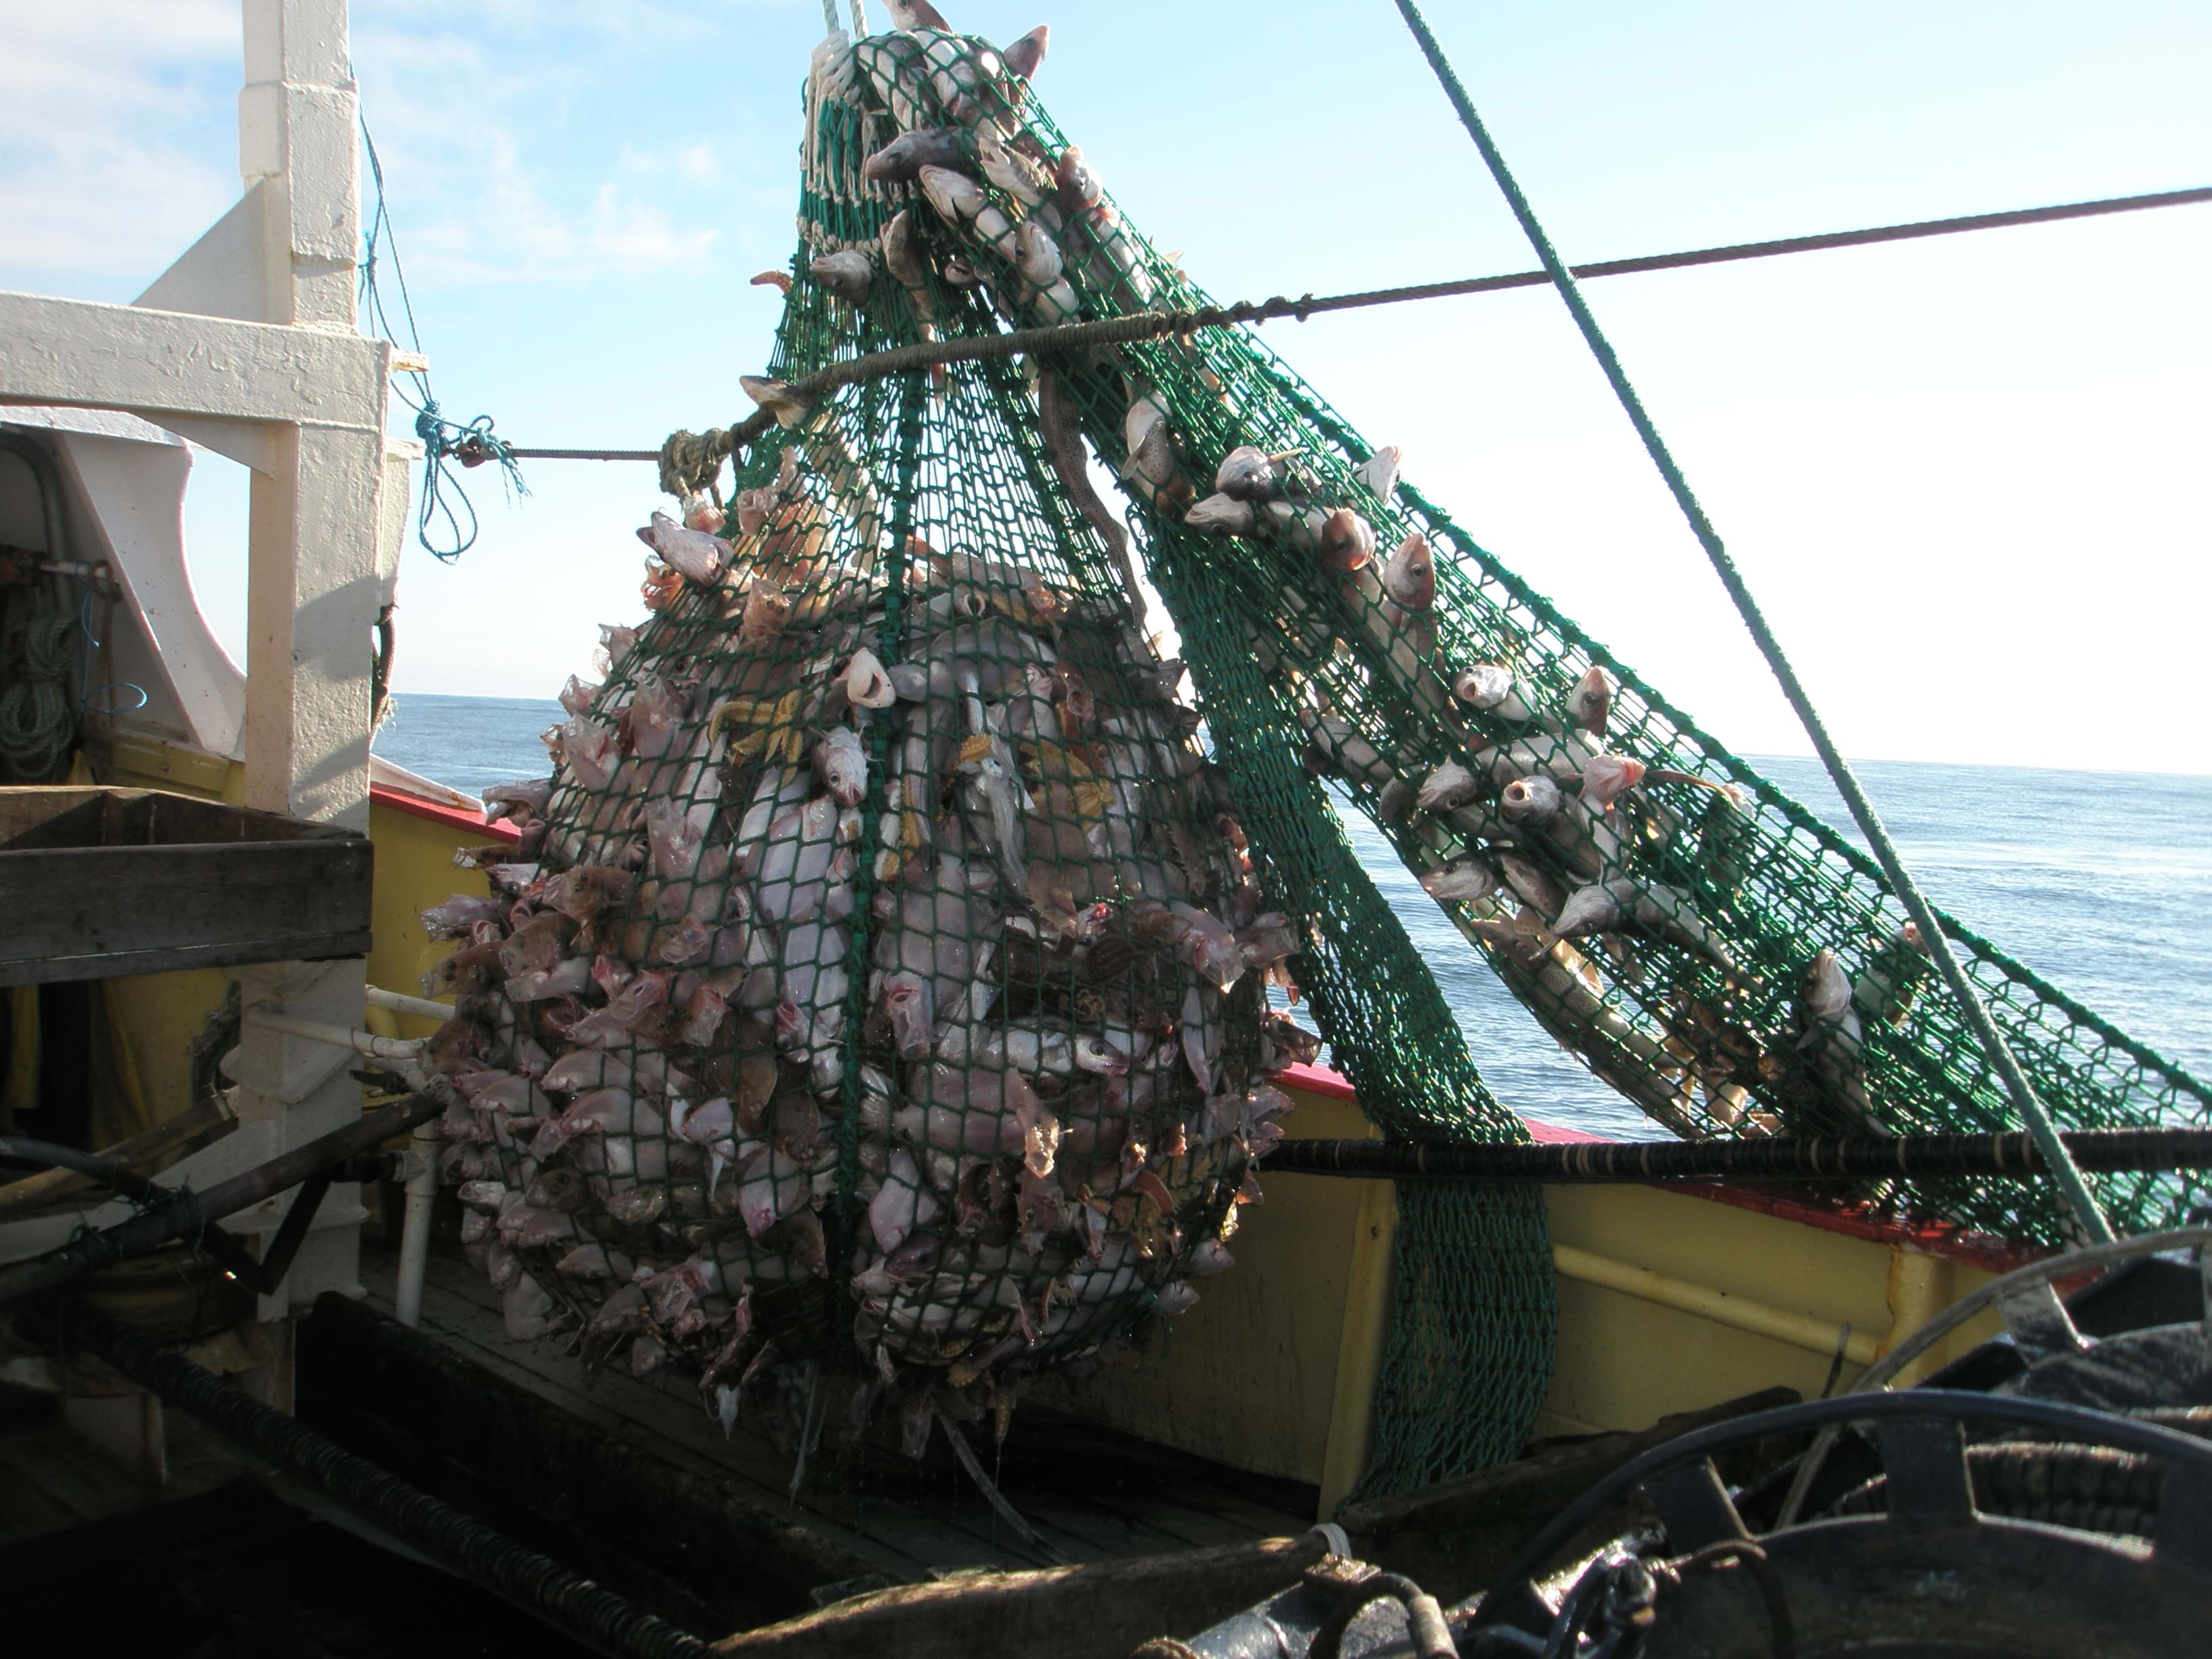 A large four-panel square mesh cod-end fishing net being emptied on board the vessel's deck at sea